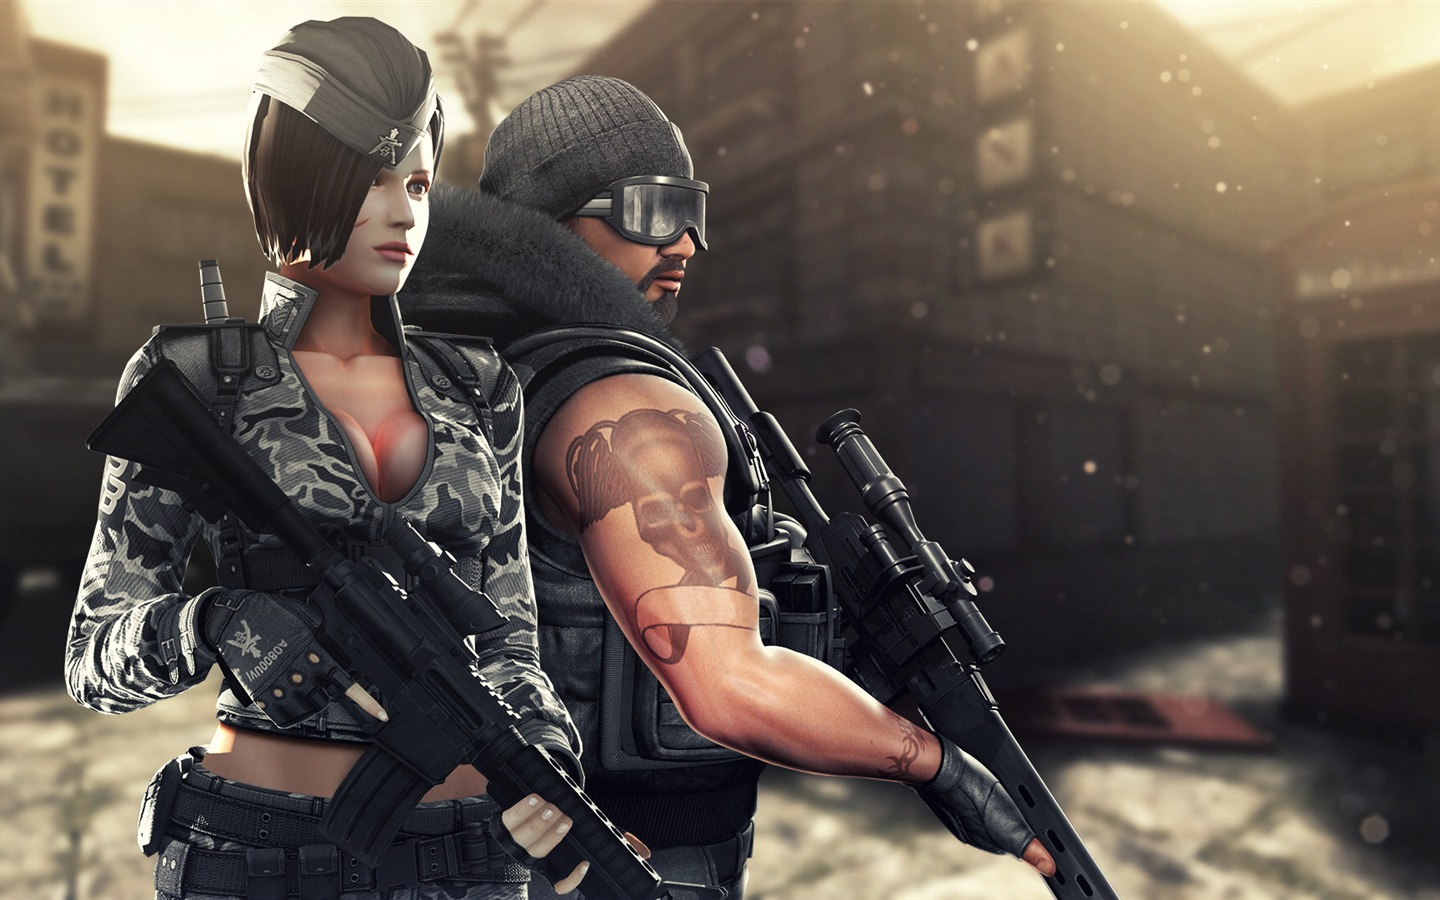 Point Blank HD game wallpapers #9 - 1440x900